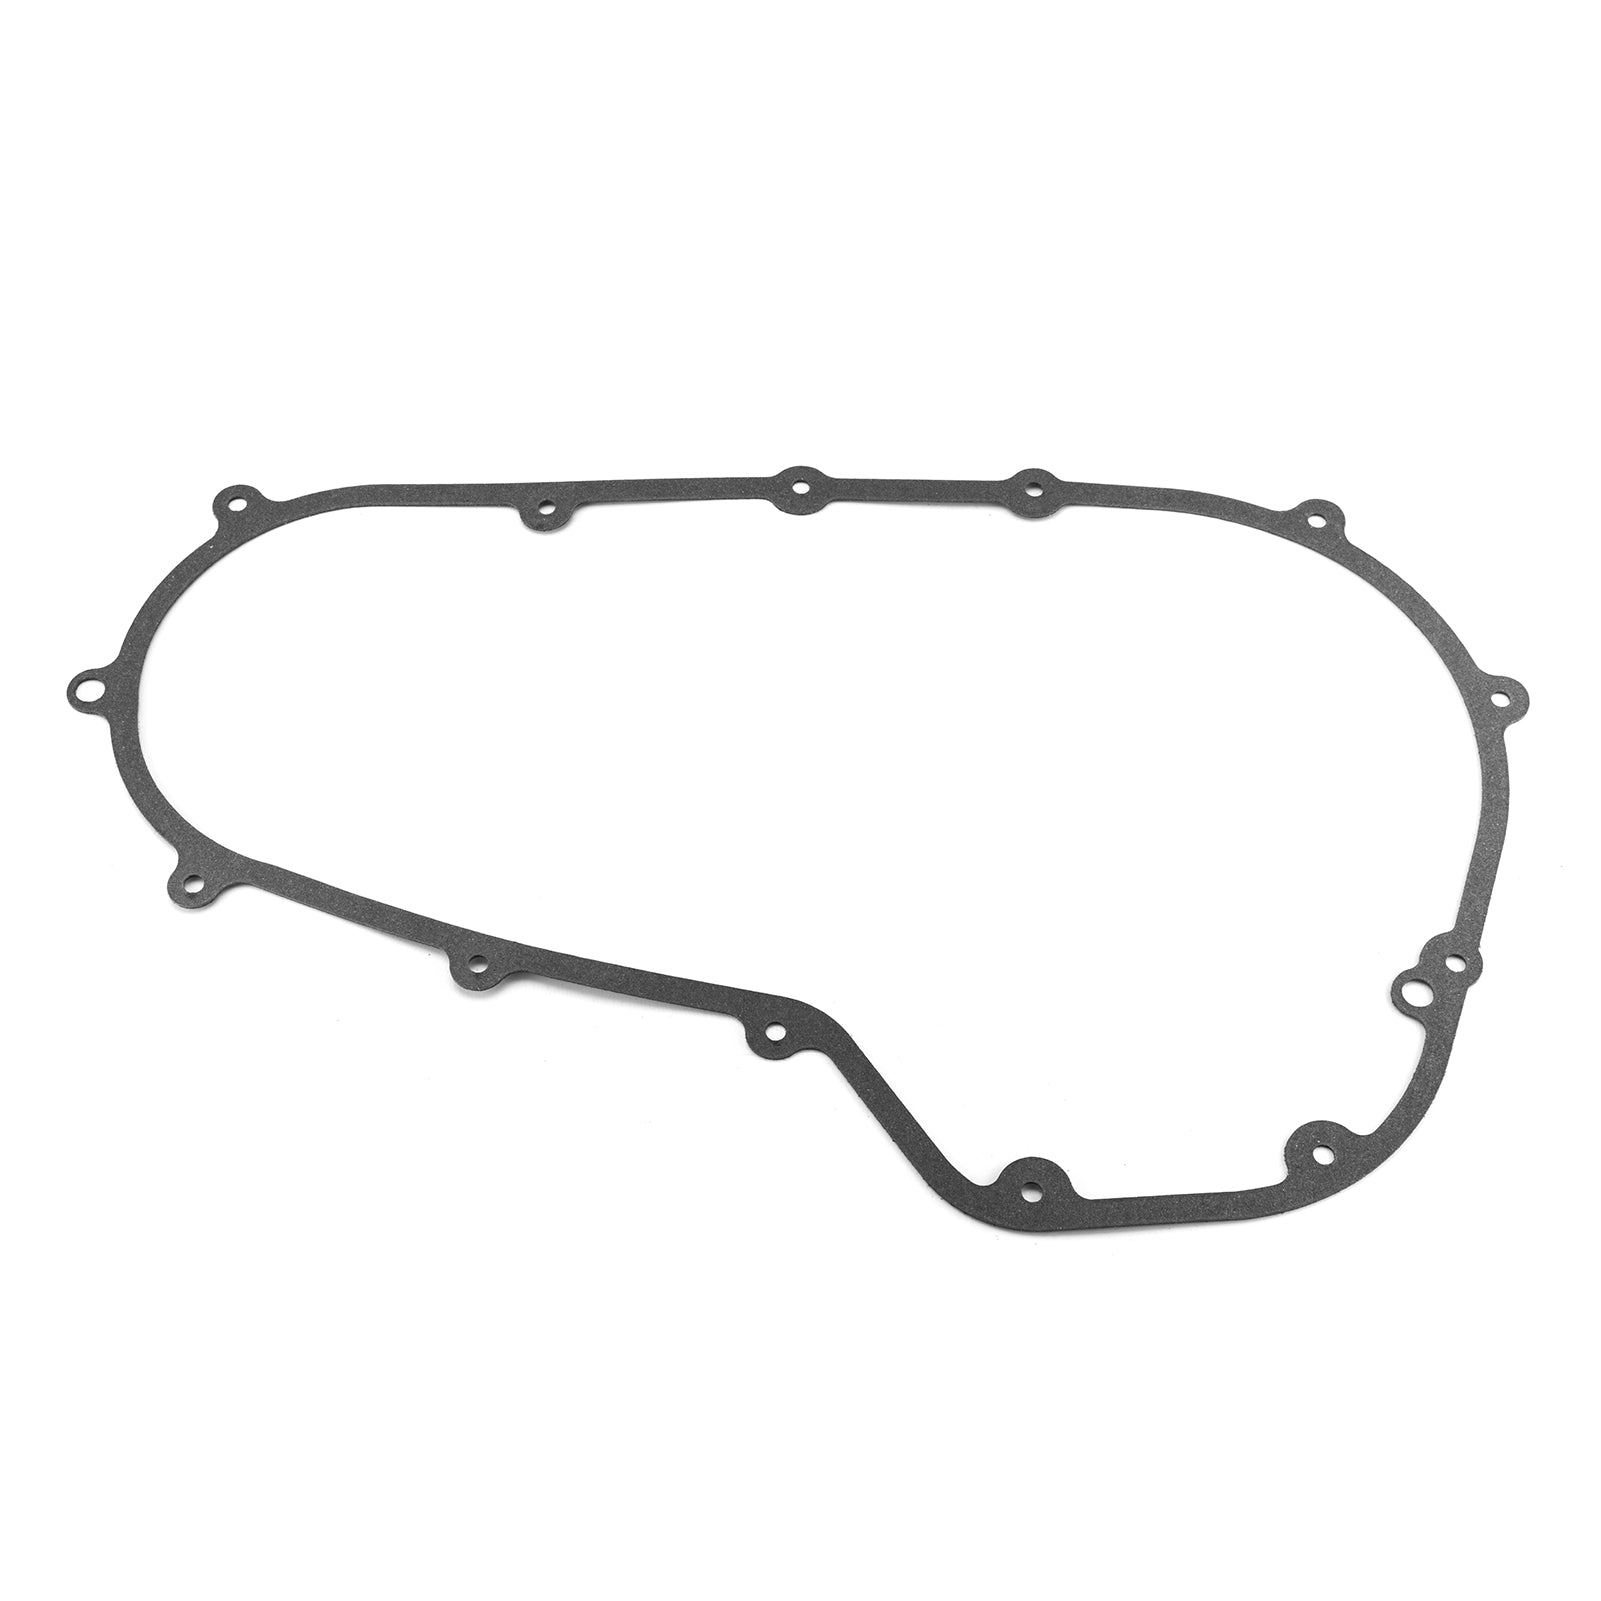 Harley Touring Electra Glide Ultra Classic Road Glide Road King Primary Cover Gasket Kit-8